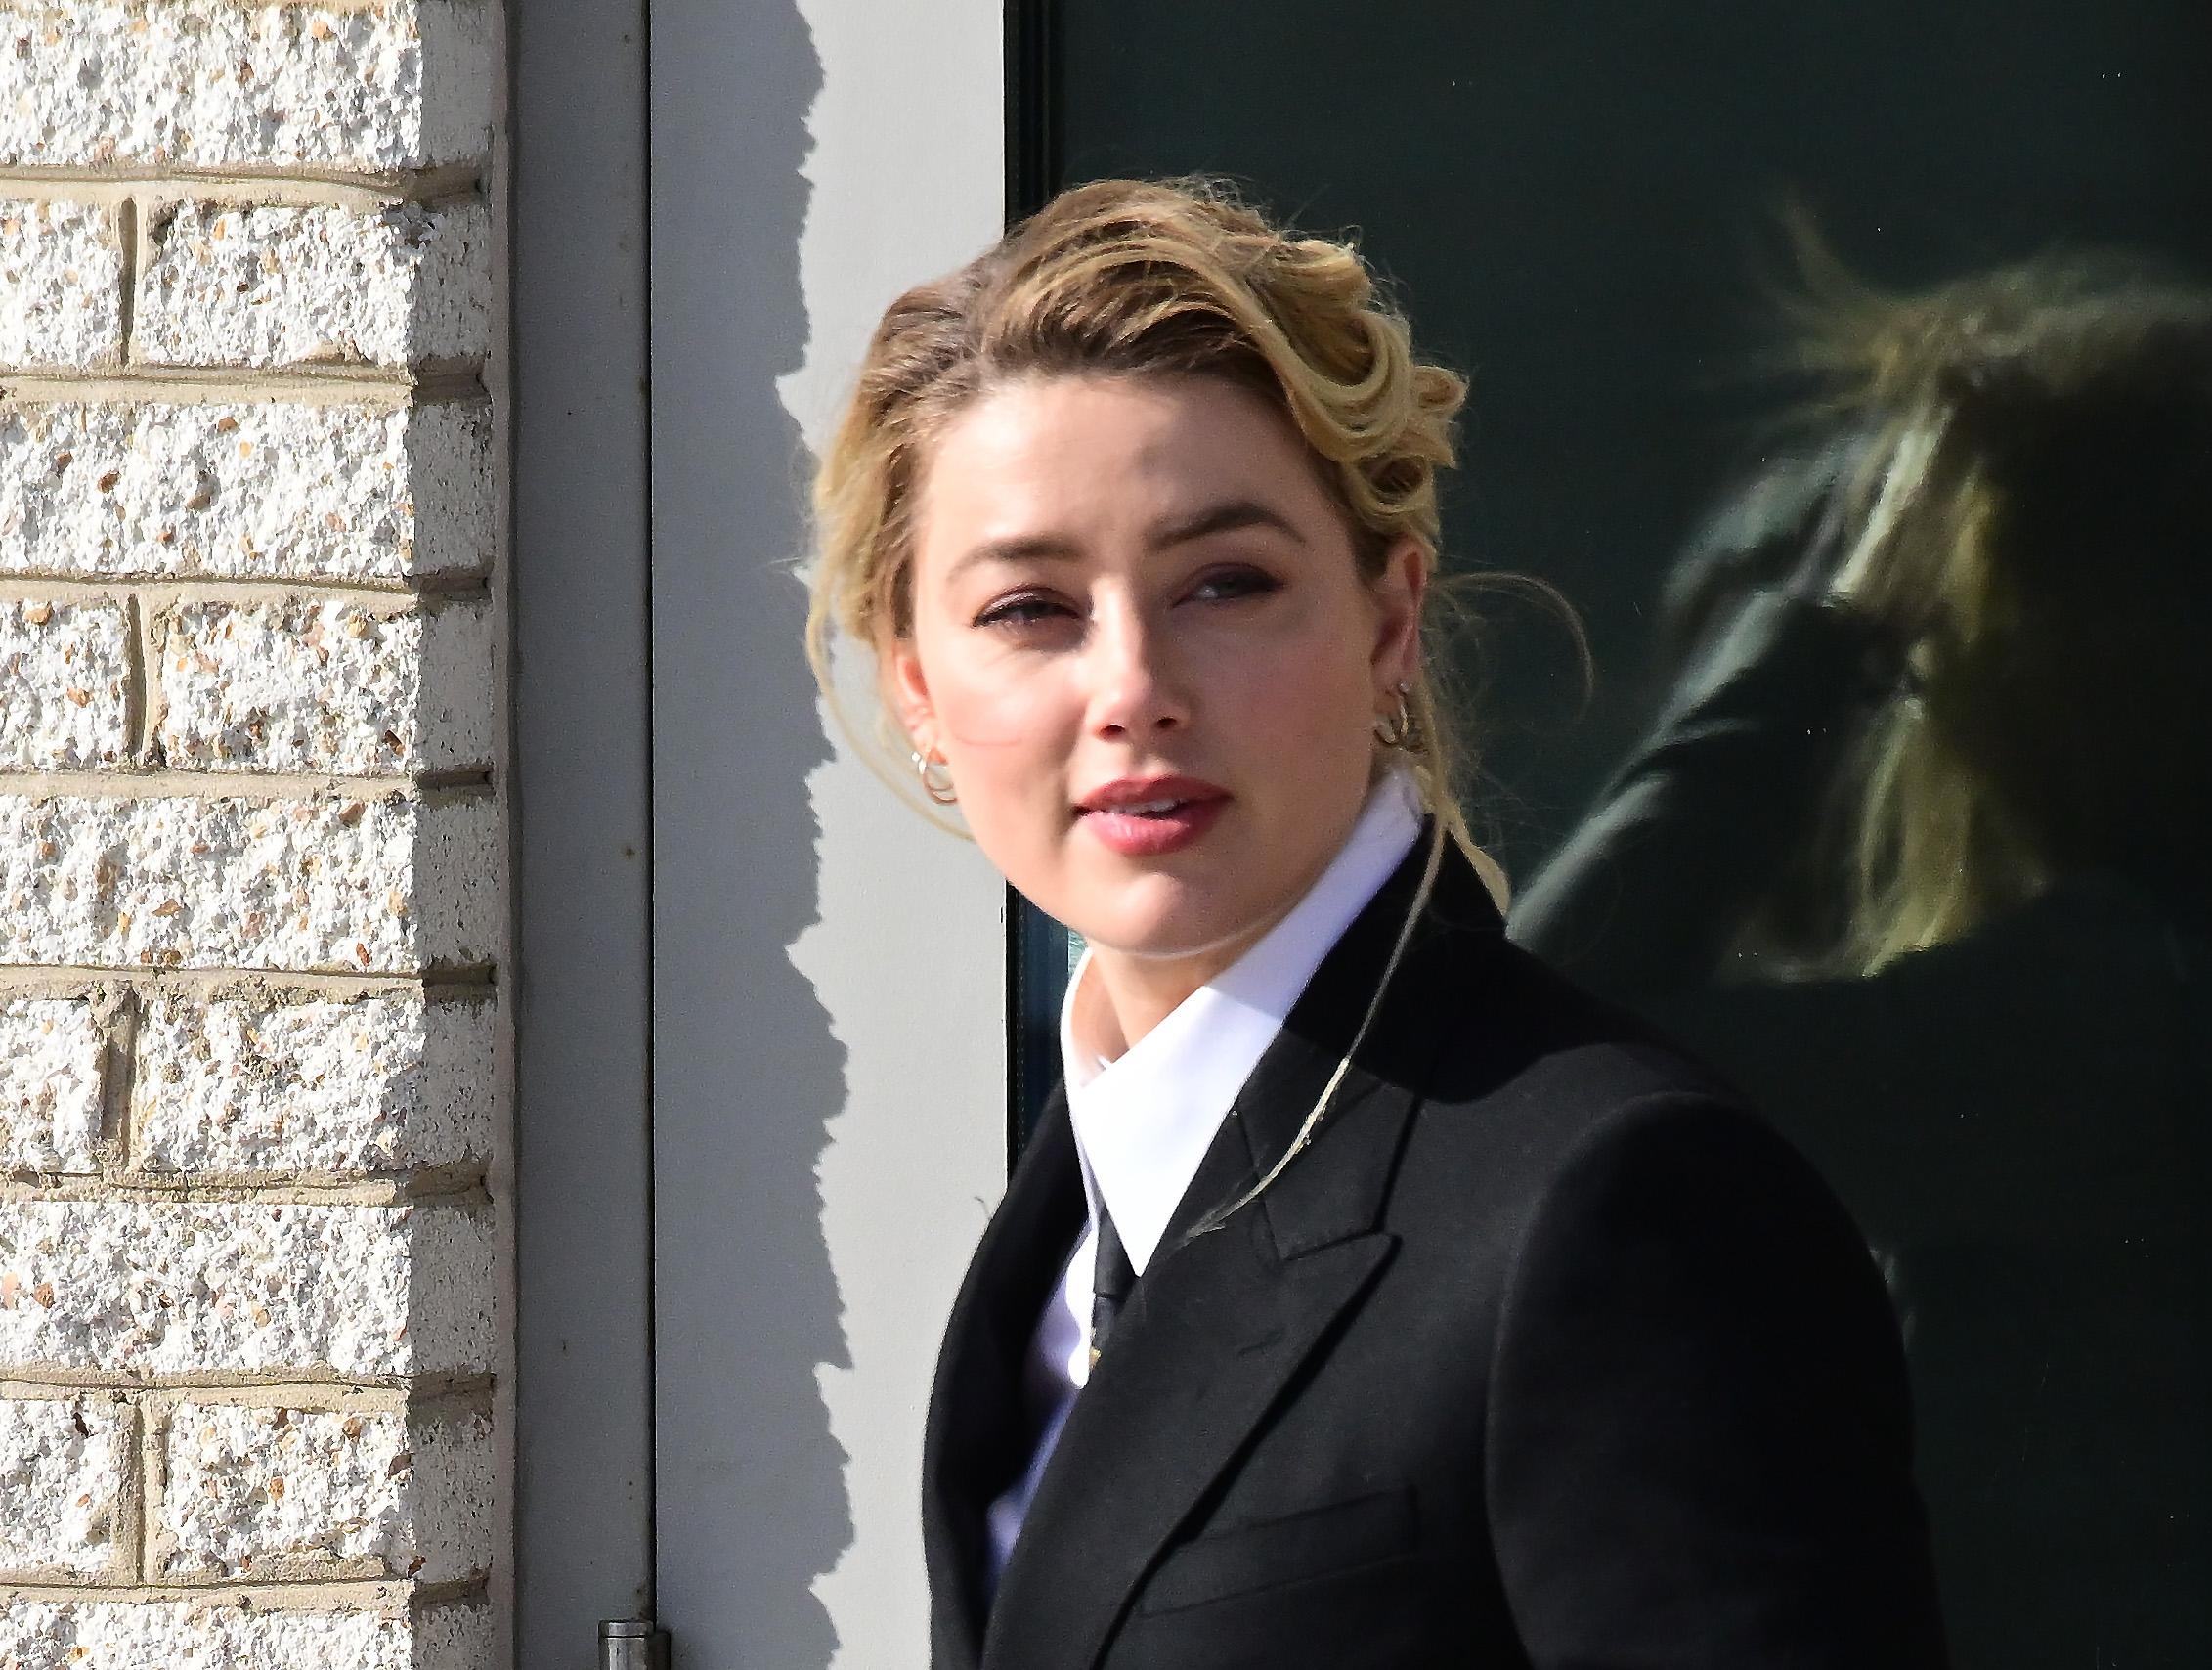 Amber Heard arrives for her trial at the Fairfax County Courthouse in Fairfax, Virginia